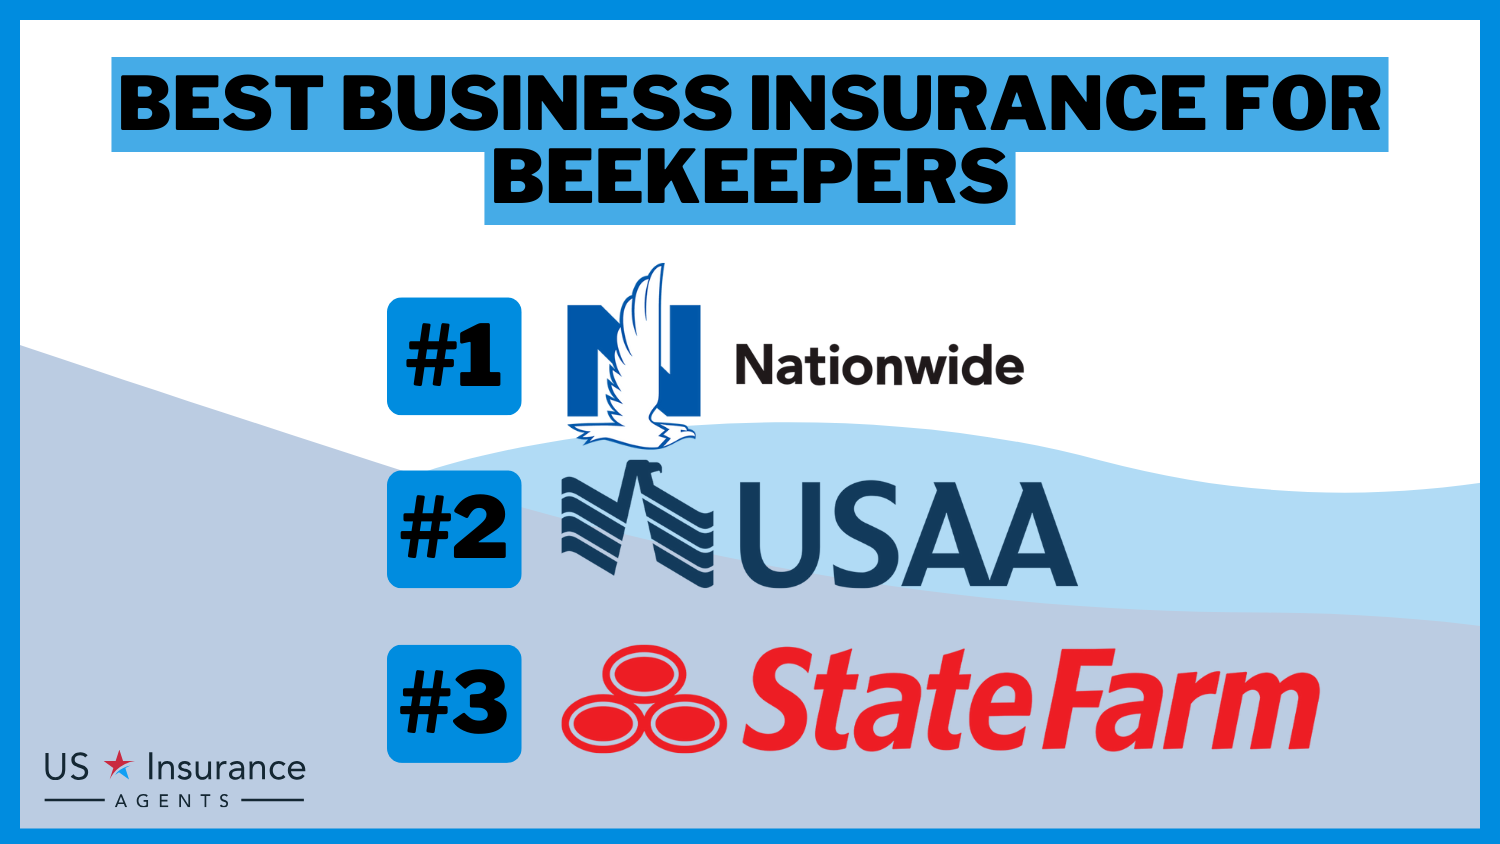 3 Best Business Insurance for Beekeepers: Nationwide, USAA, and State Farm.